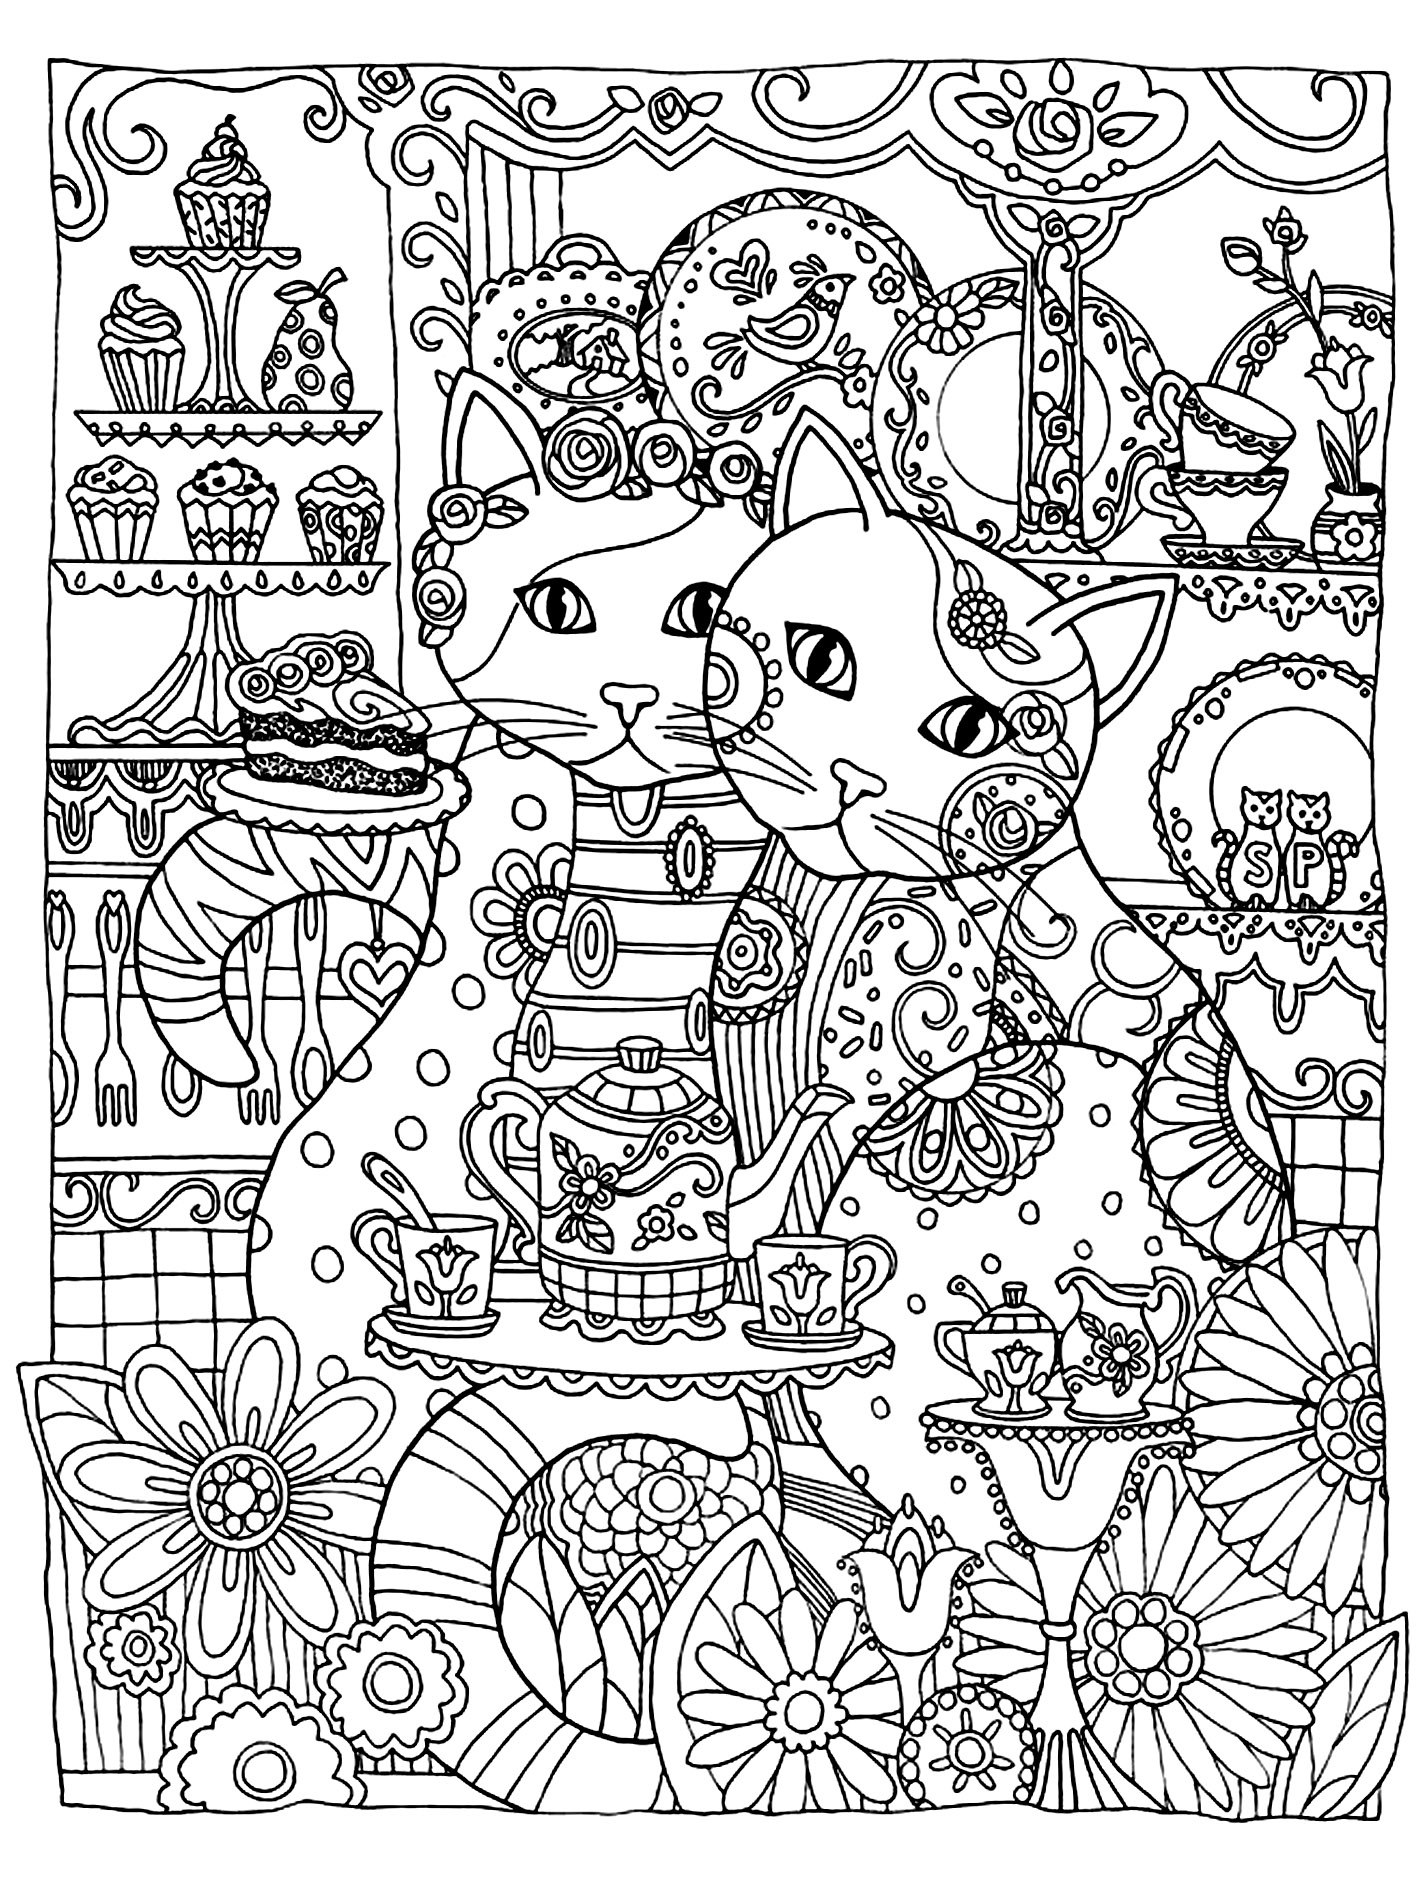 Cool Cat coloring pages to print and color